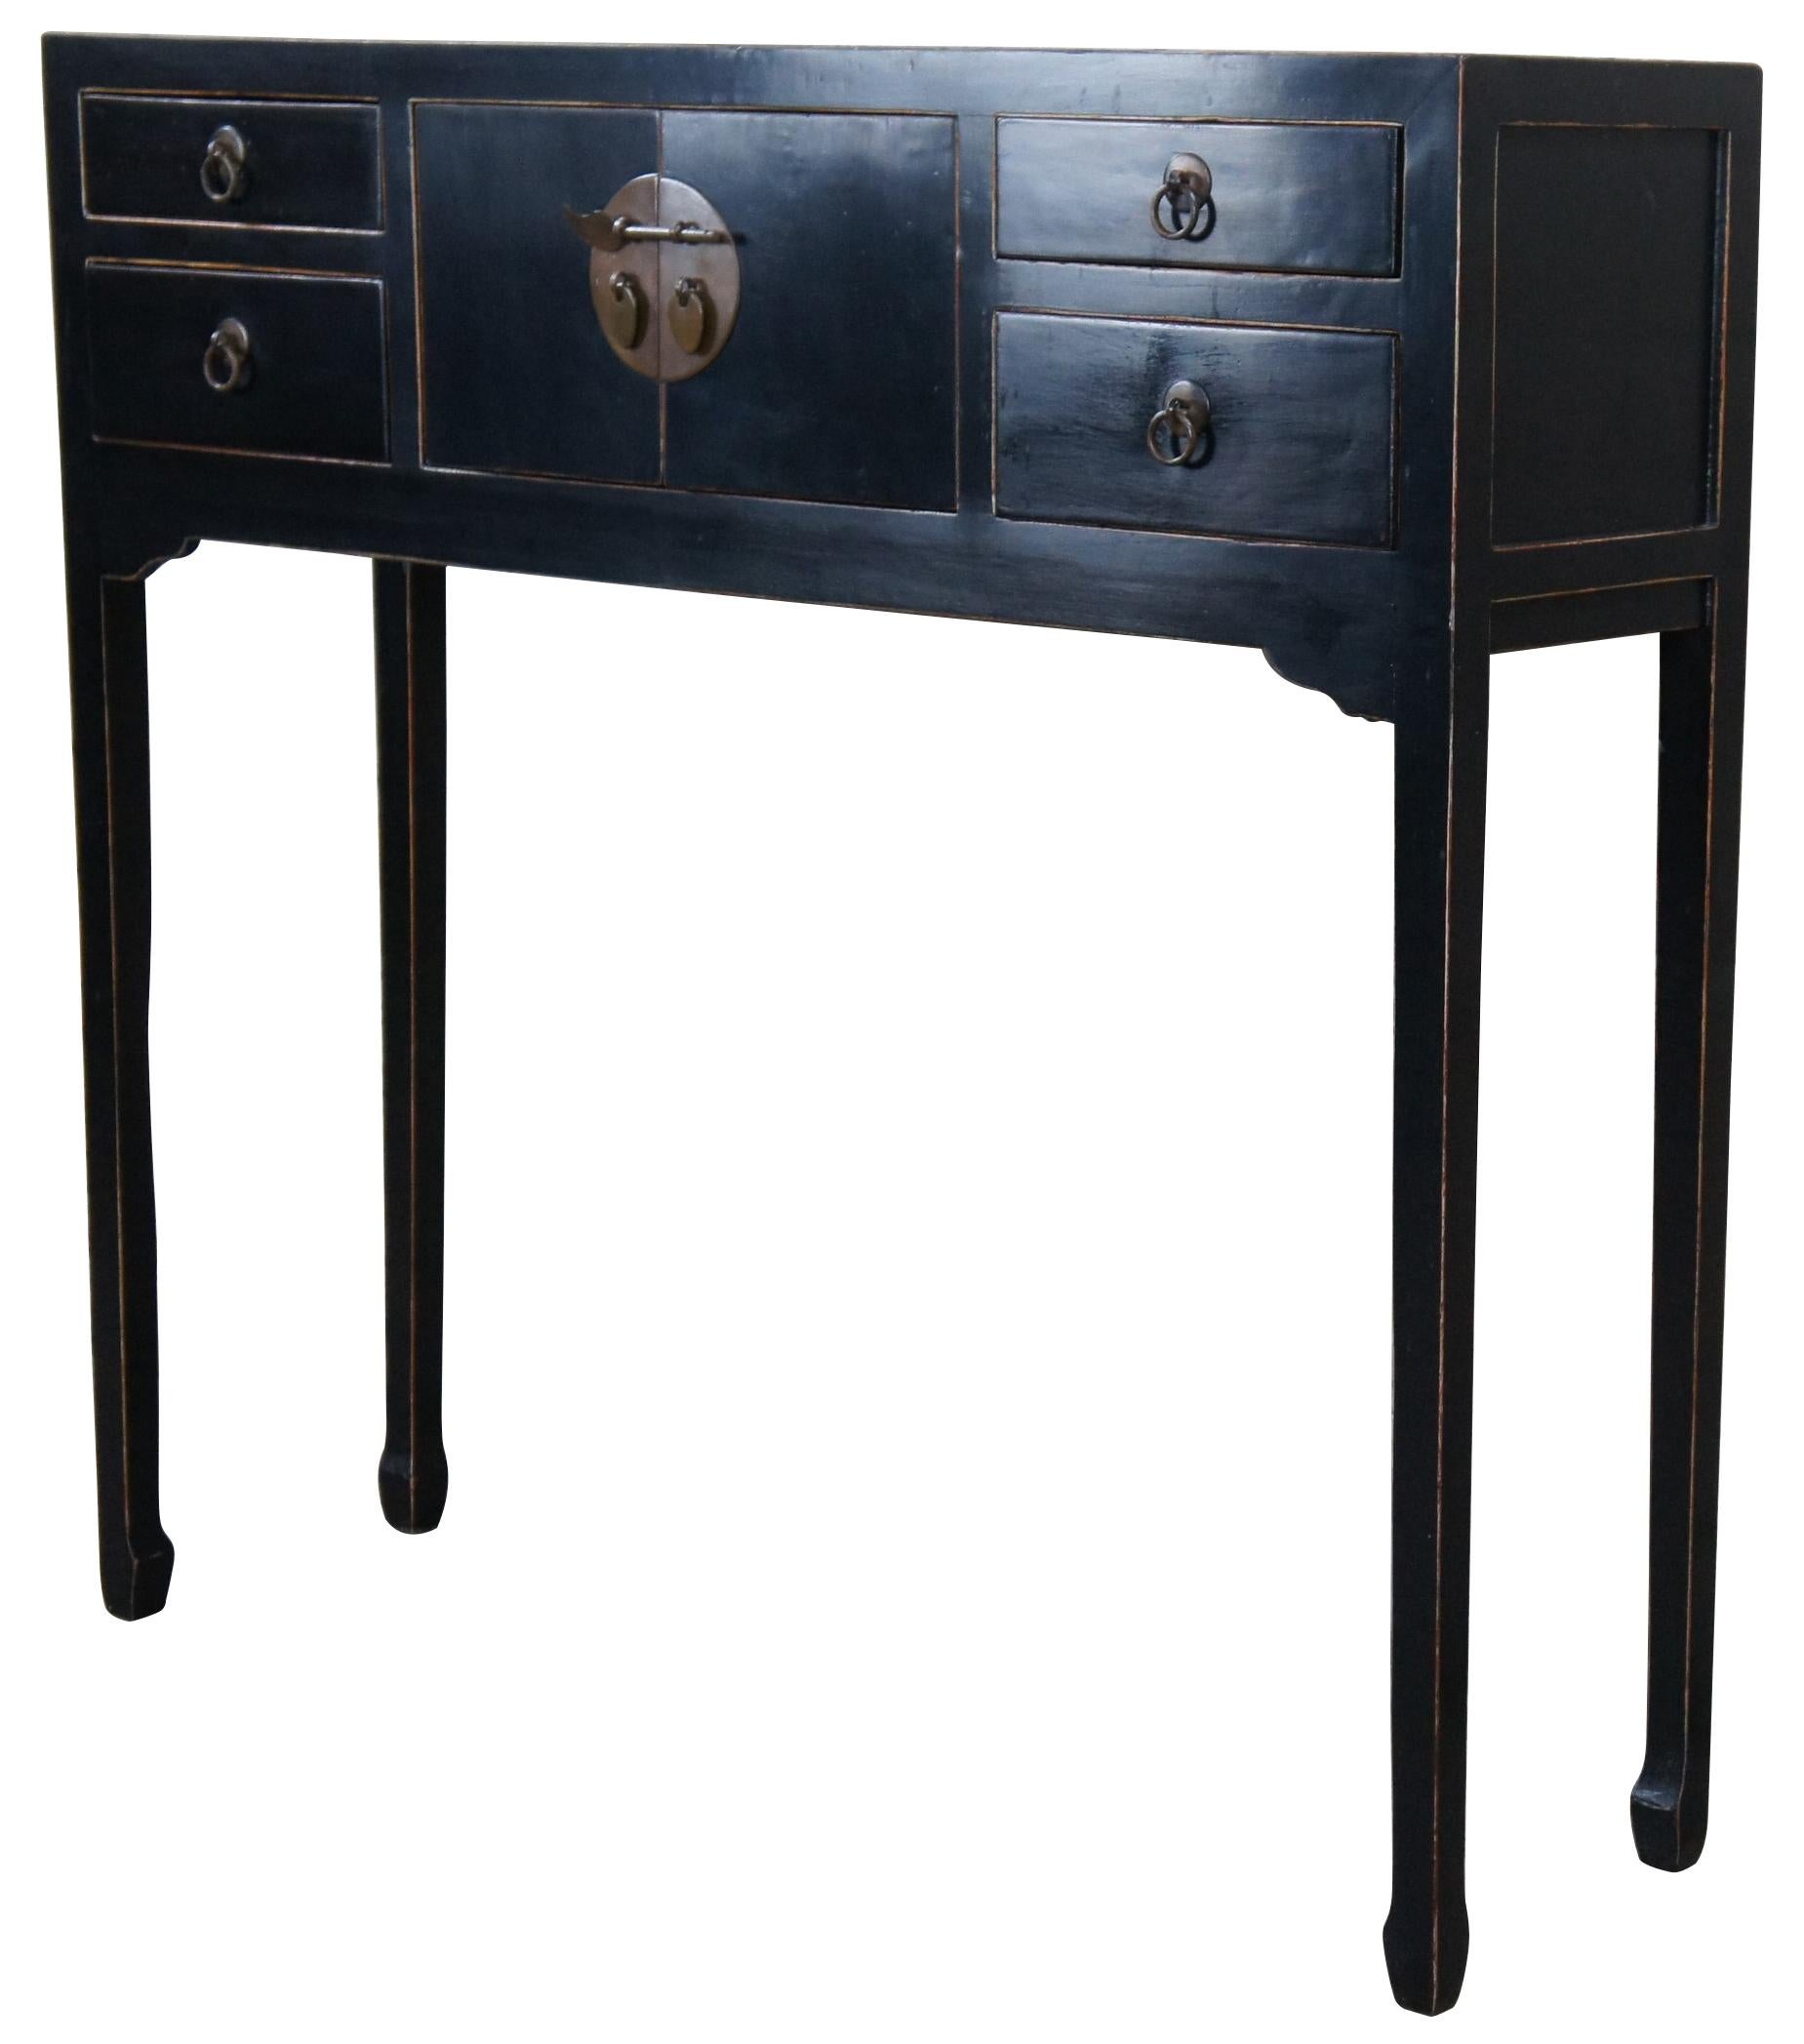 A lovely Chinese Ming style console. A nice complement to a hallway or behind a sofa. Black lacquered elmwood with a central cabinet flanked by four dovetailed drawers with brass hardware. Measure: 36